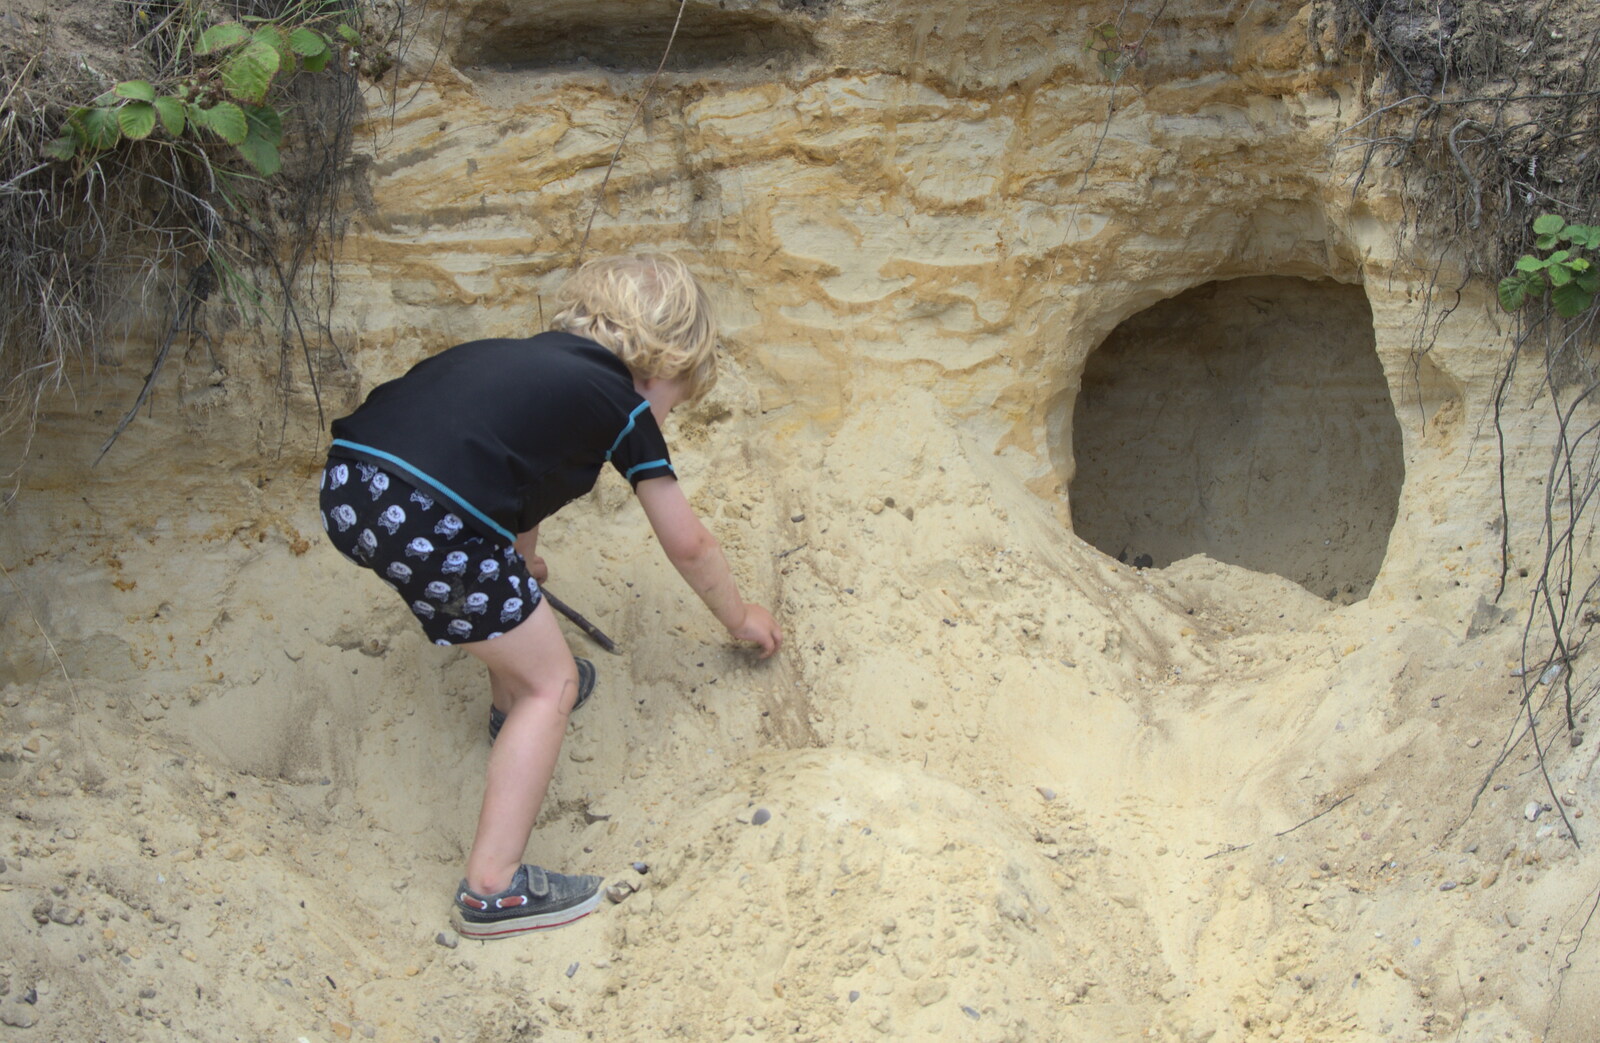 Fred inspects a hole in the cliff from Camping by the Seaside, Cliff House, Dunwich, Suffolk - 15th August 2012